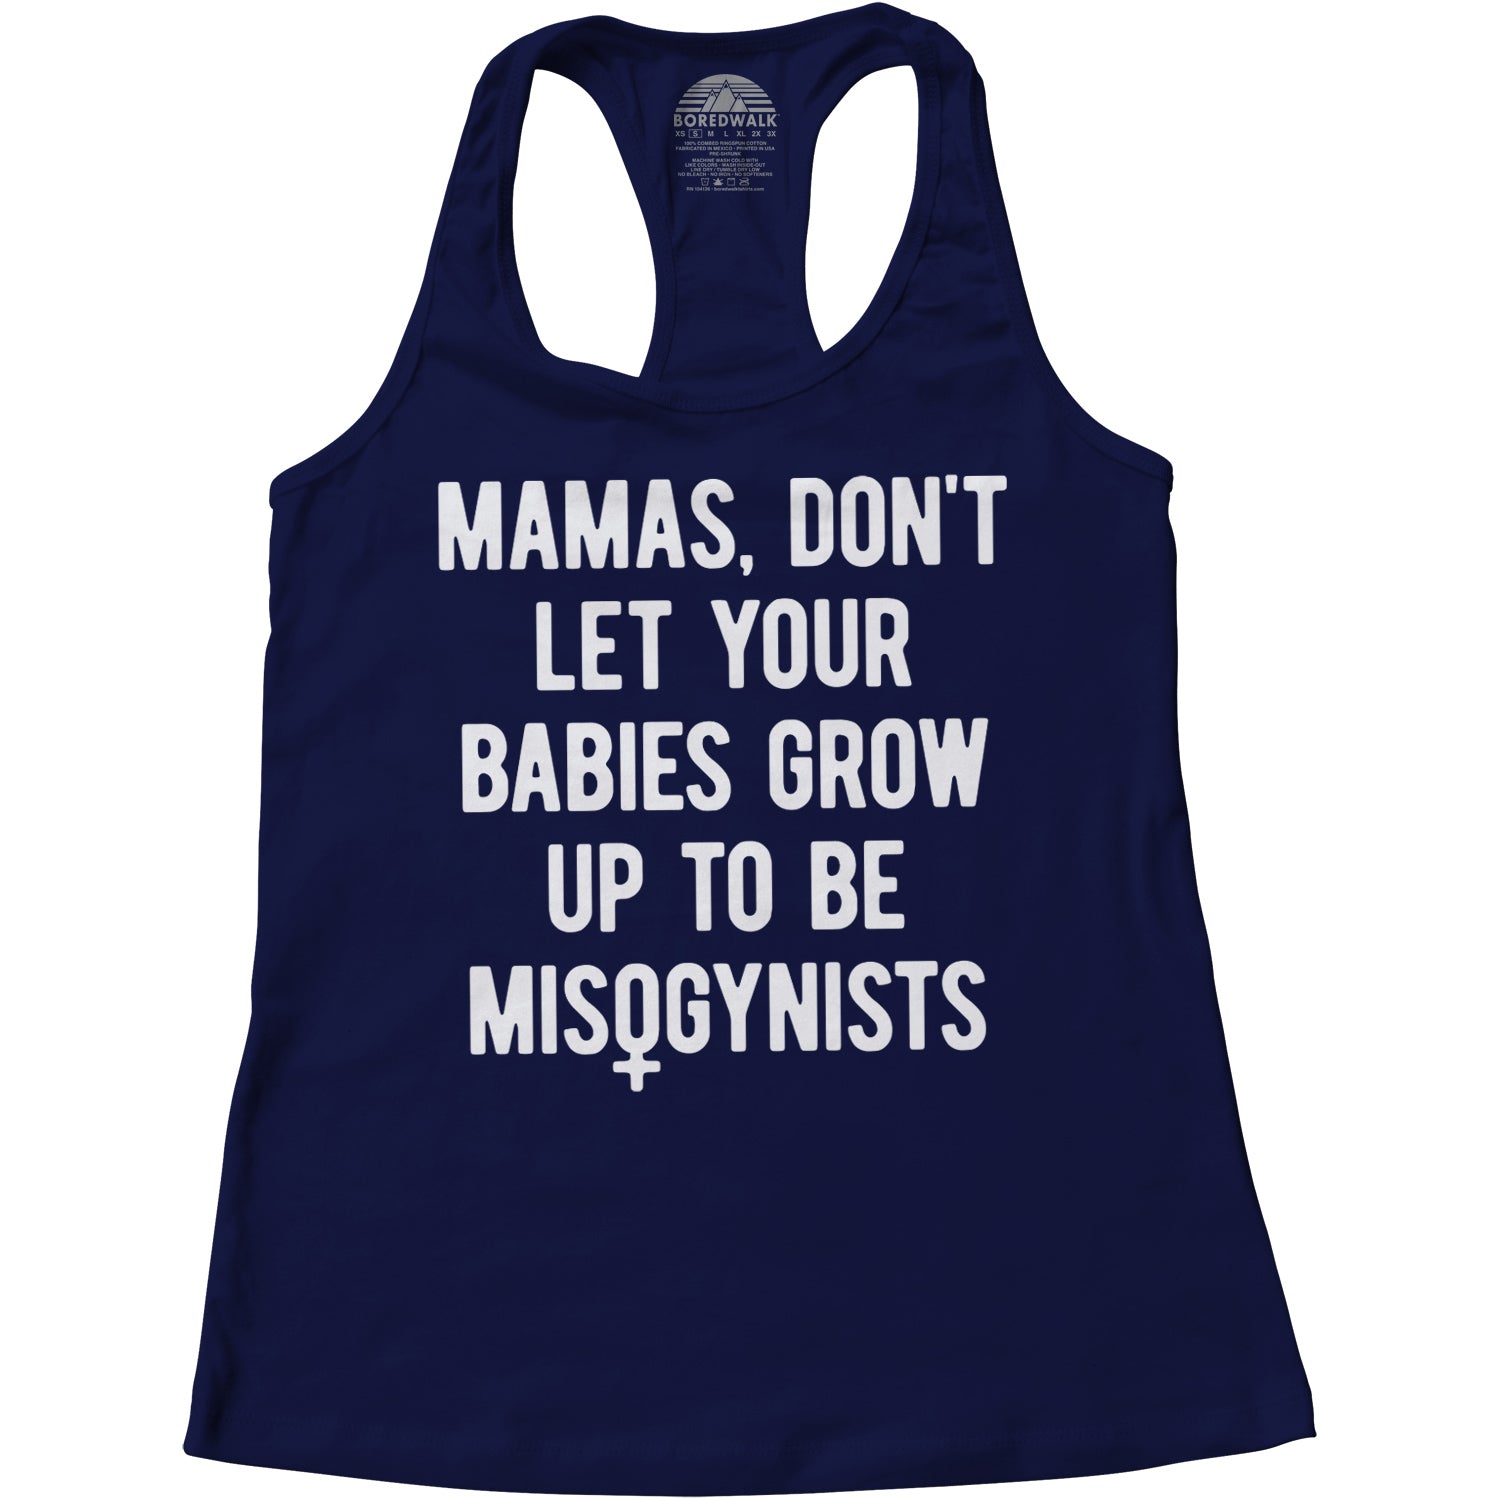 Women's Mamas Don't Let Your Babies Grow Up to be Misogynists Racerback Tank Top